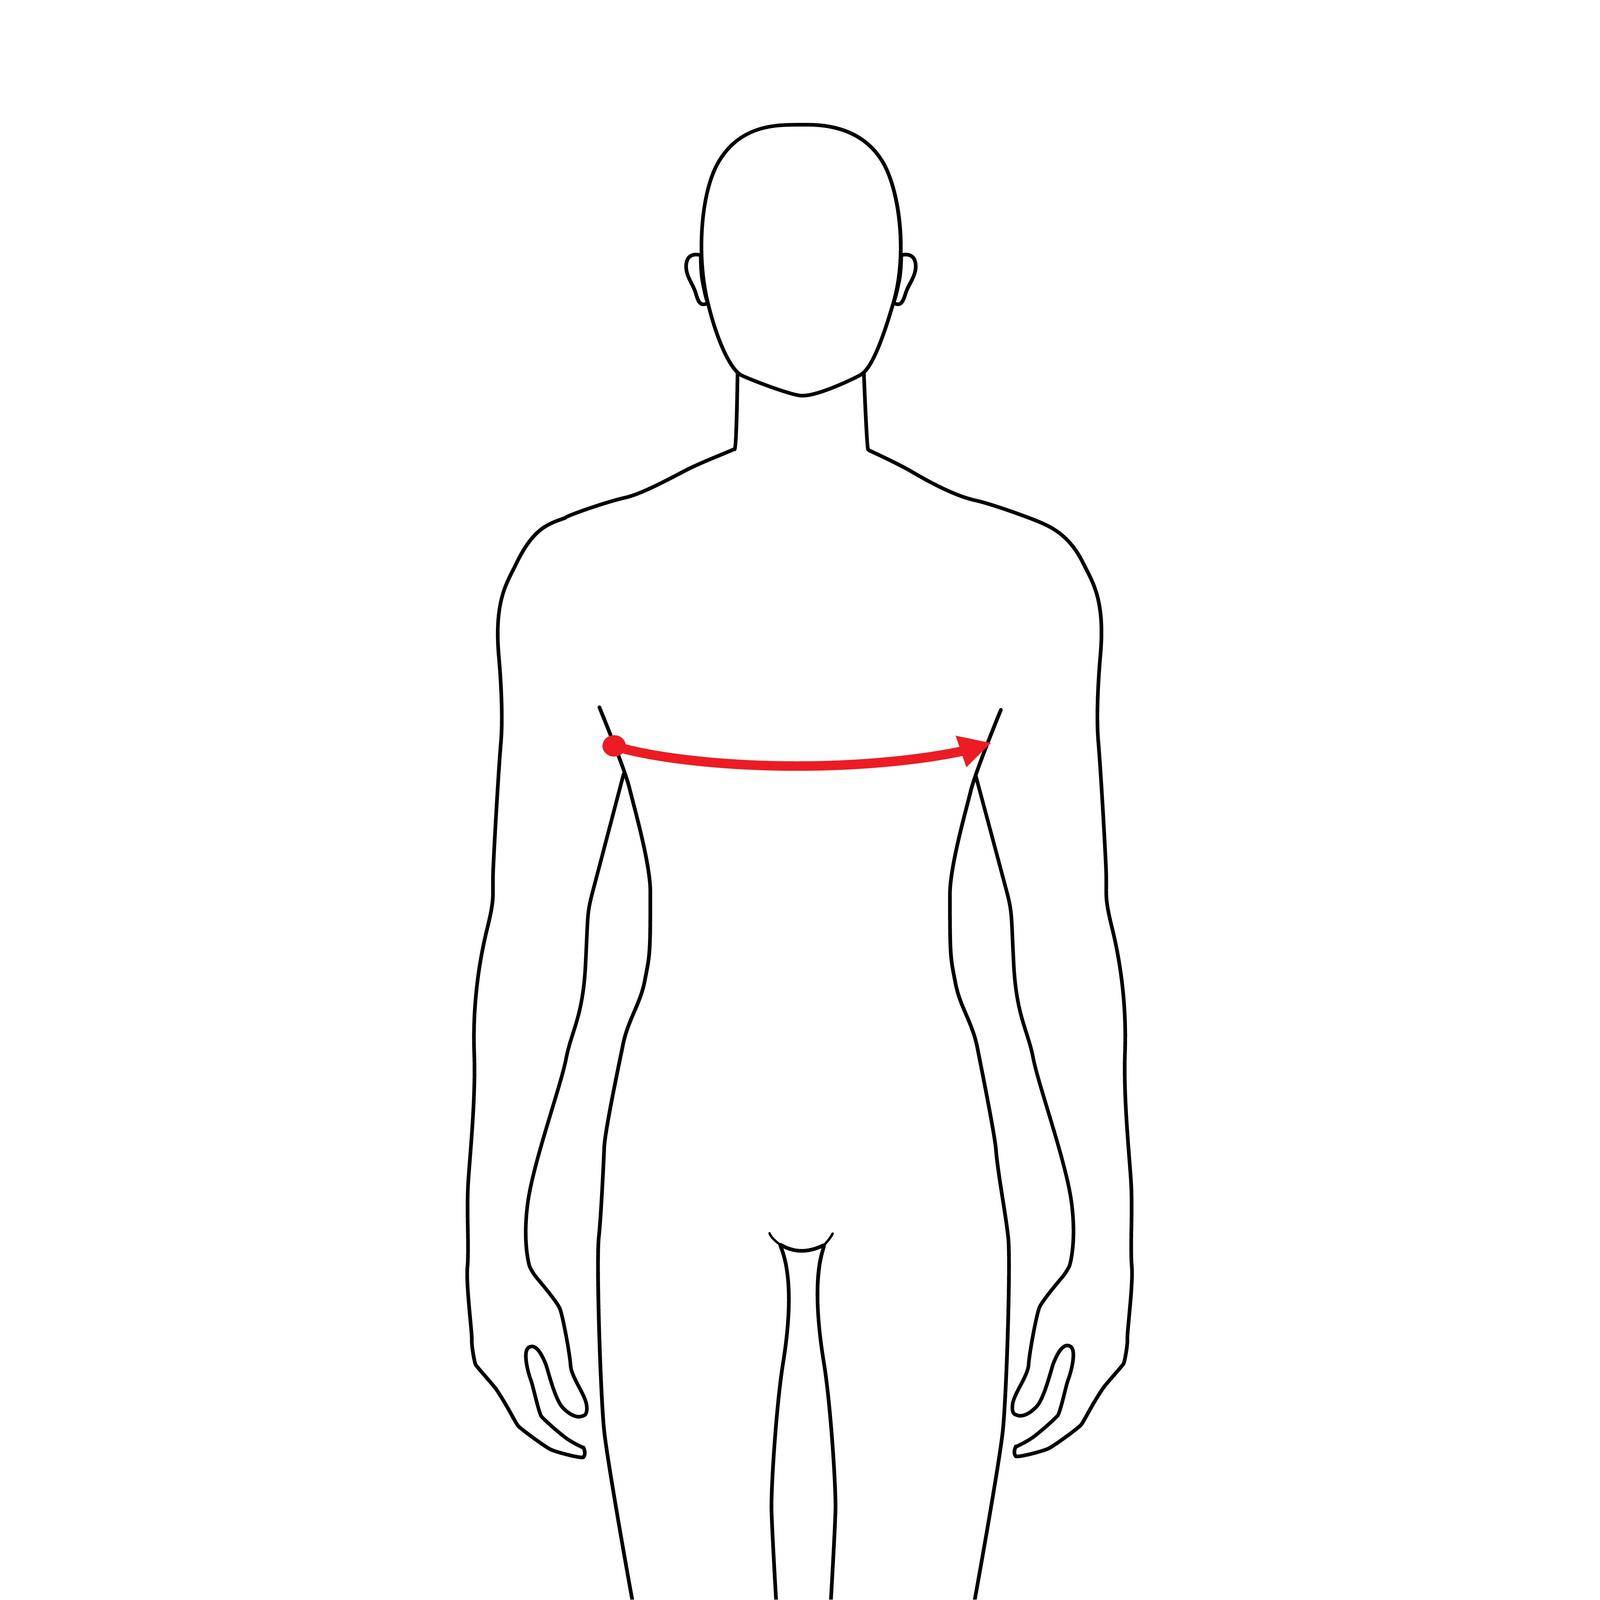 Men to do bust measurement fashion Illustration for size chart. 7.5 head size boy for site or online shop. Human body infographic template for clothes.